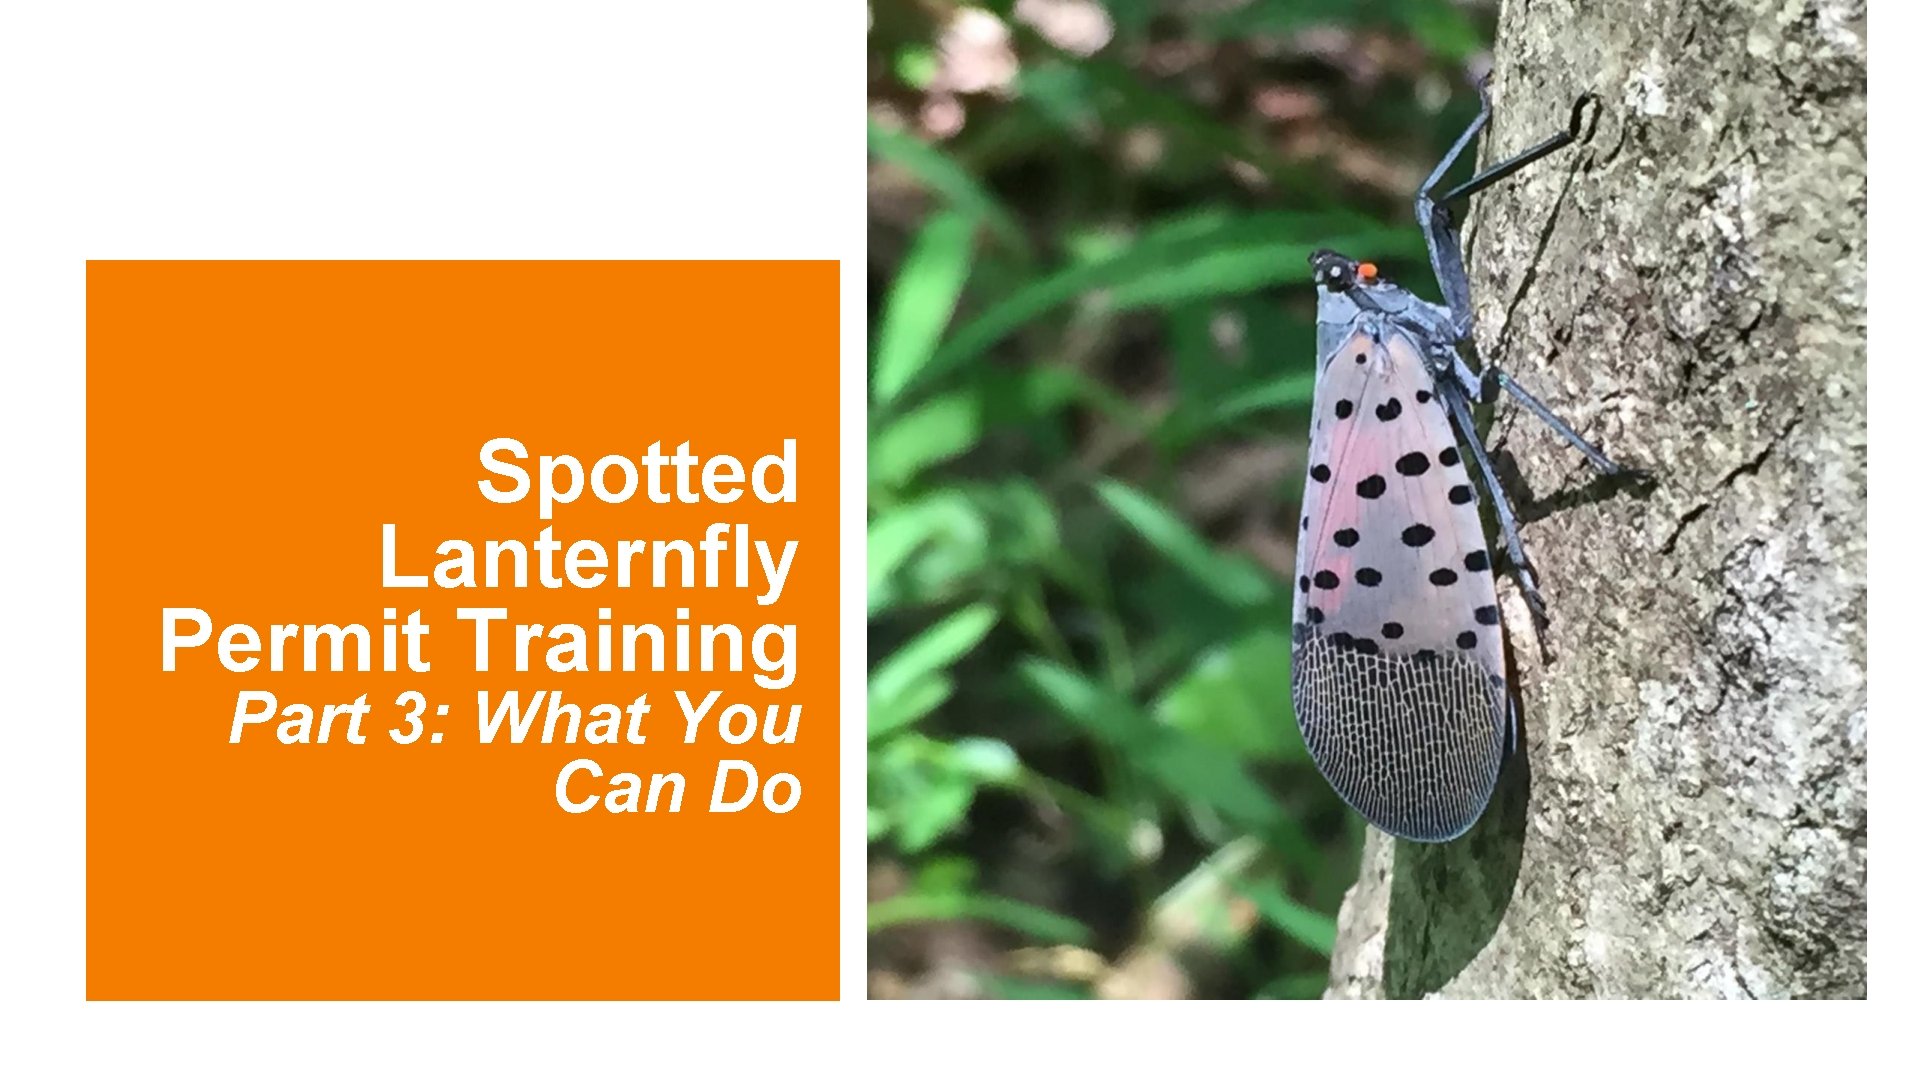 Spotted Lanternfly Permit Training Part 3: What You Can Do 